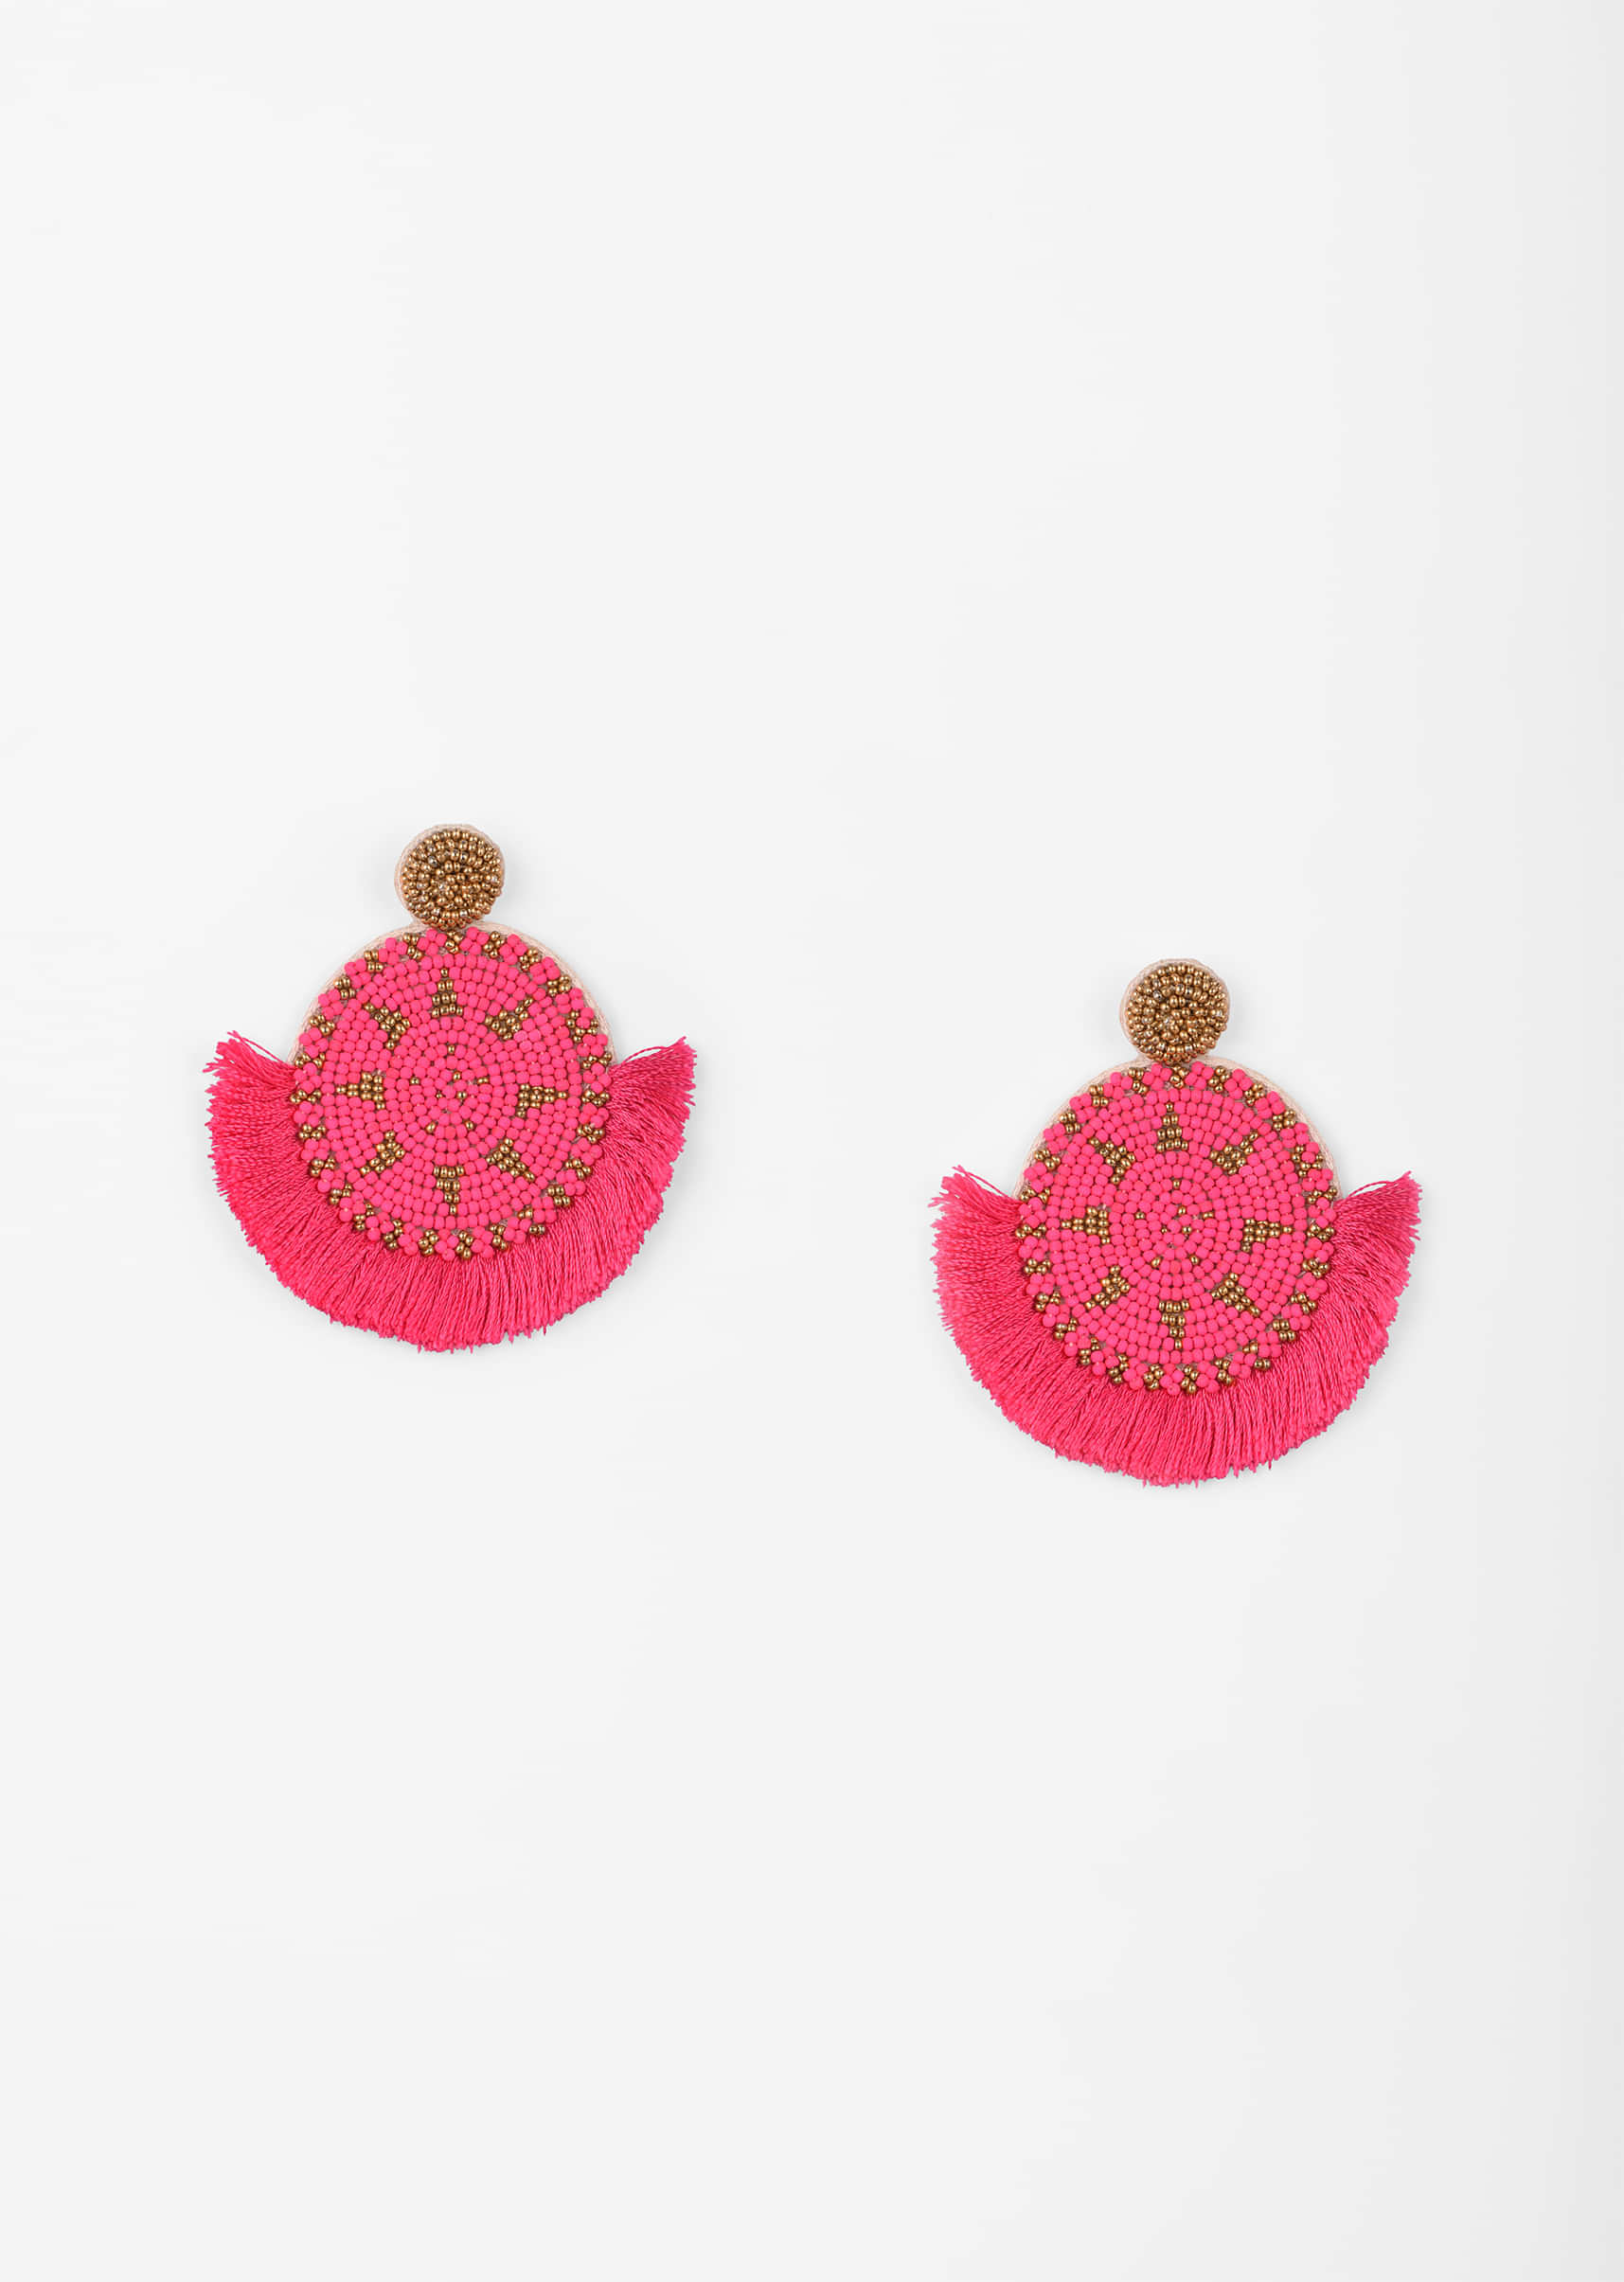 Hot Pink Earrings With Gold And Pink Beads Embroidery And Thread Fringes 